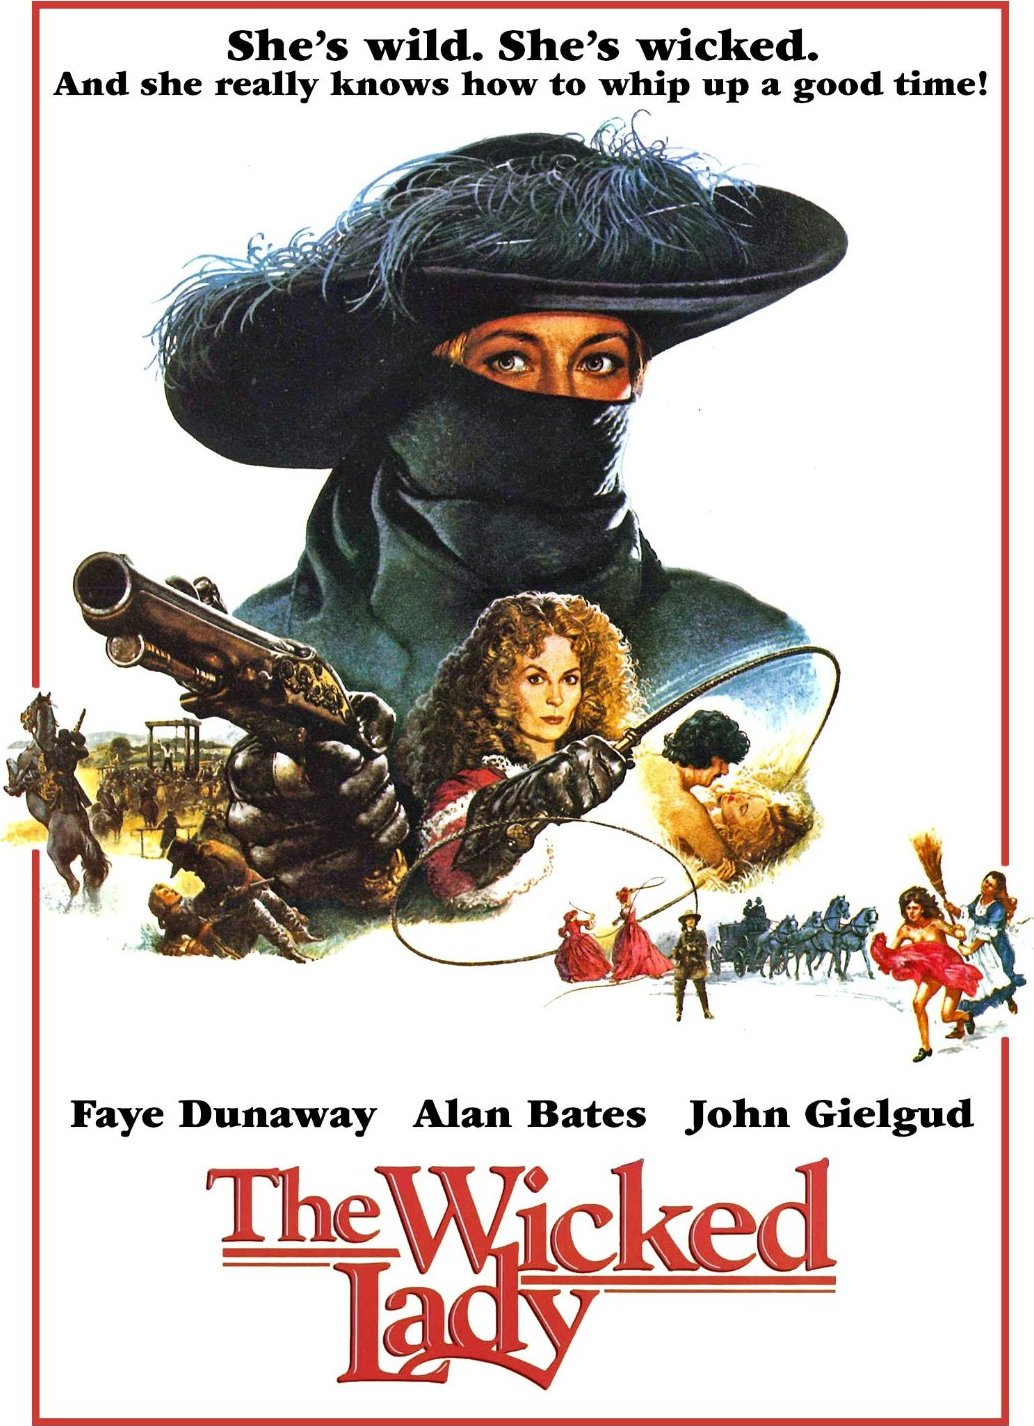 THE WICKED LADY DVD